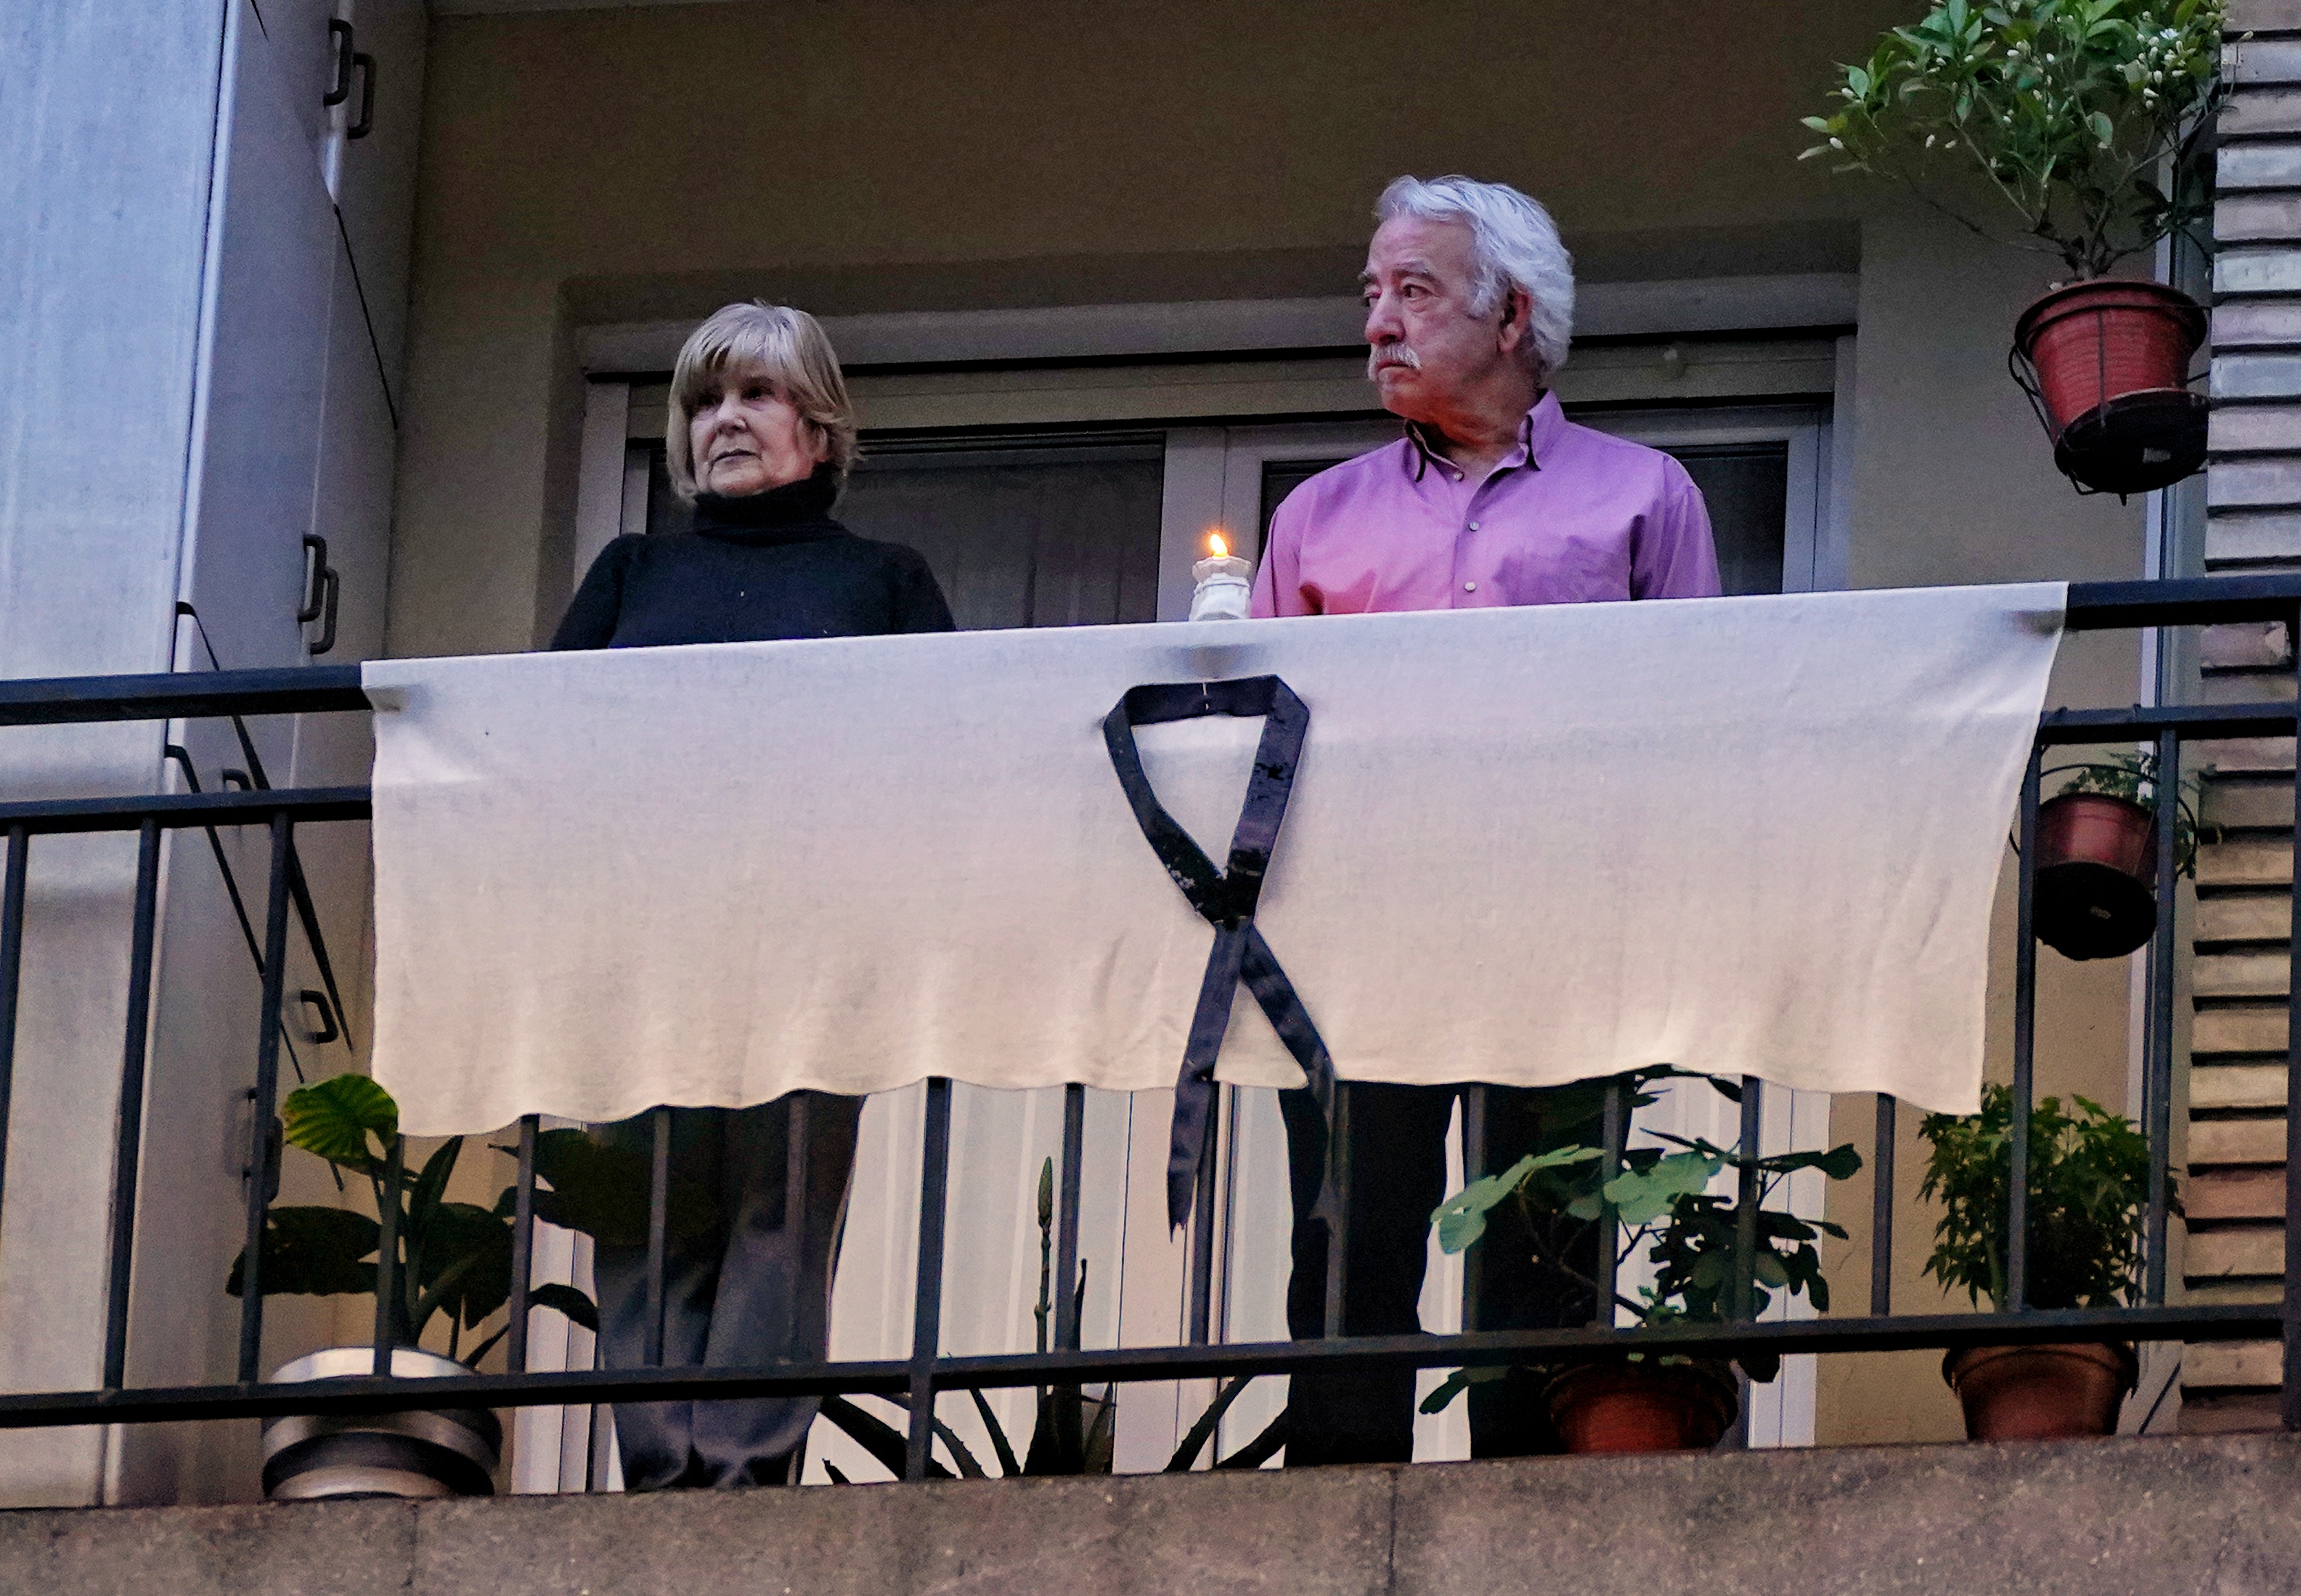 Two people leaning on their balcony to express their mourning and see the hologram